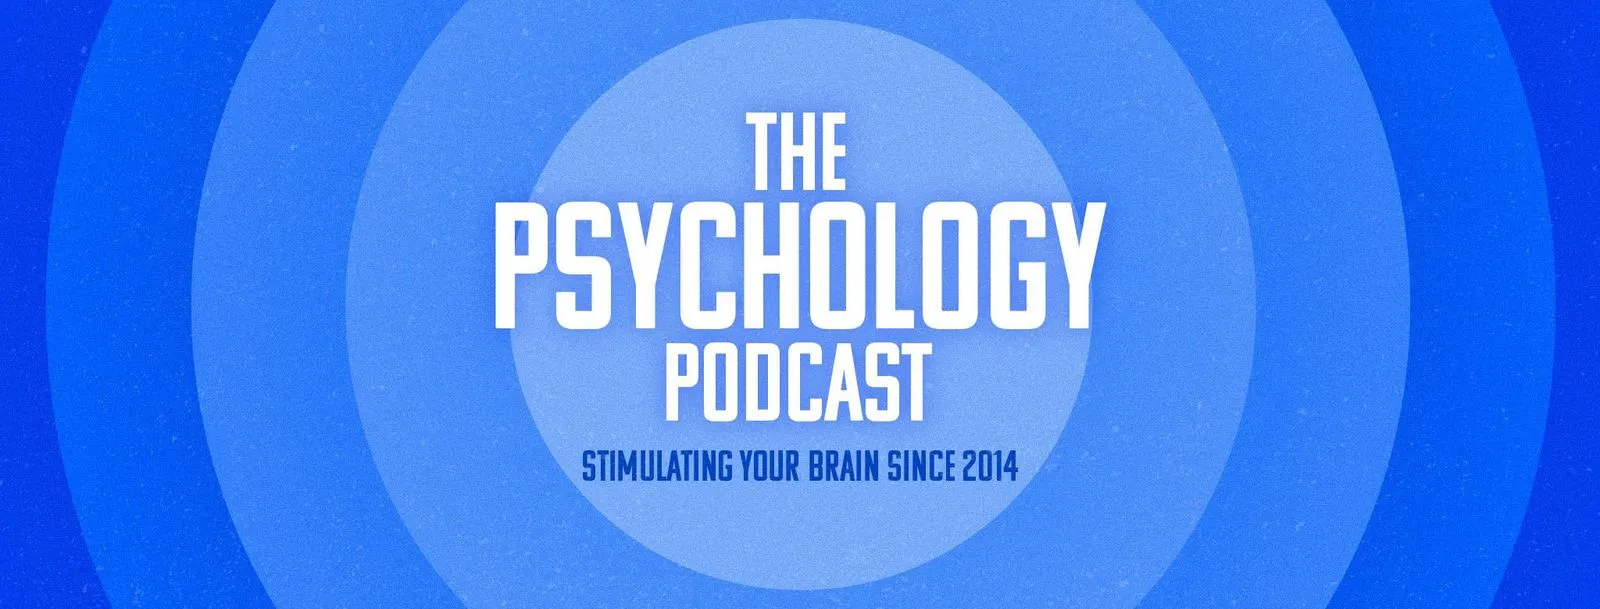 The Psychology Podcast Banner